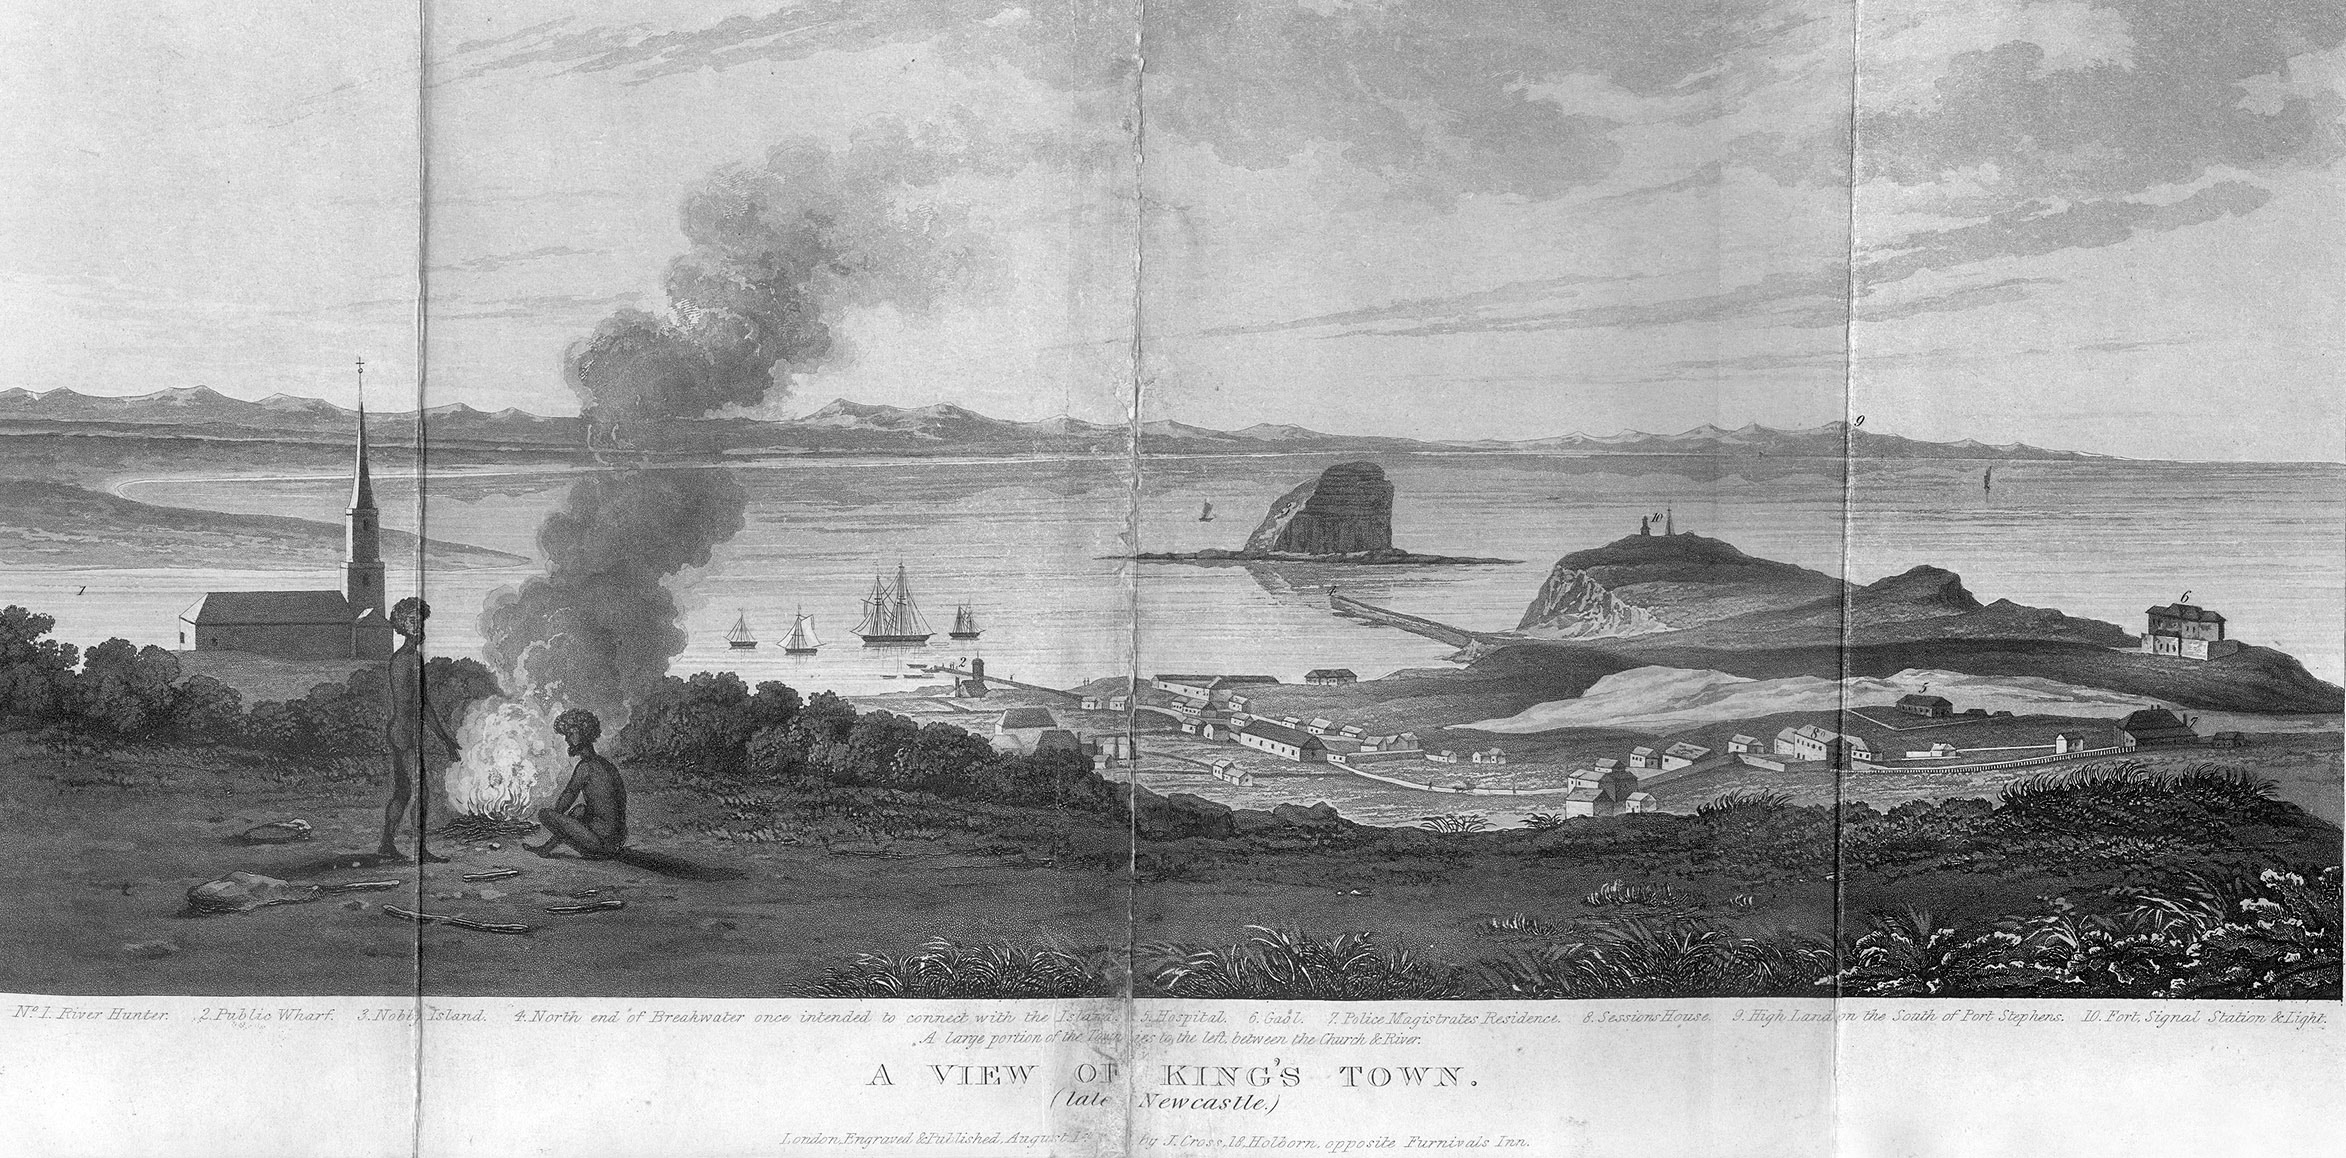 A View of King's Town (Late Newcastle) 1828